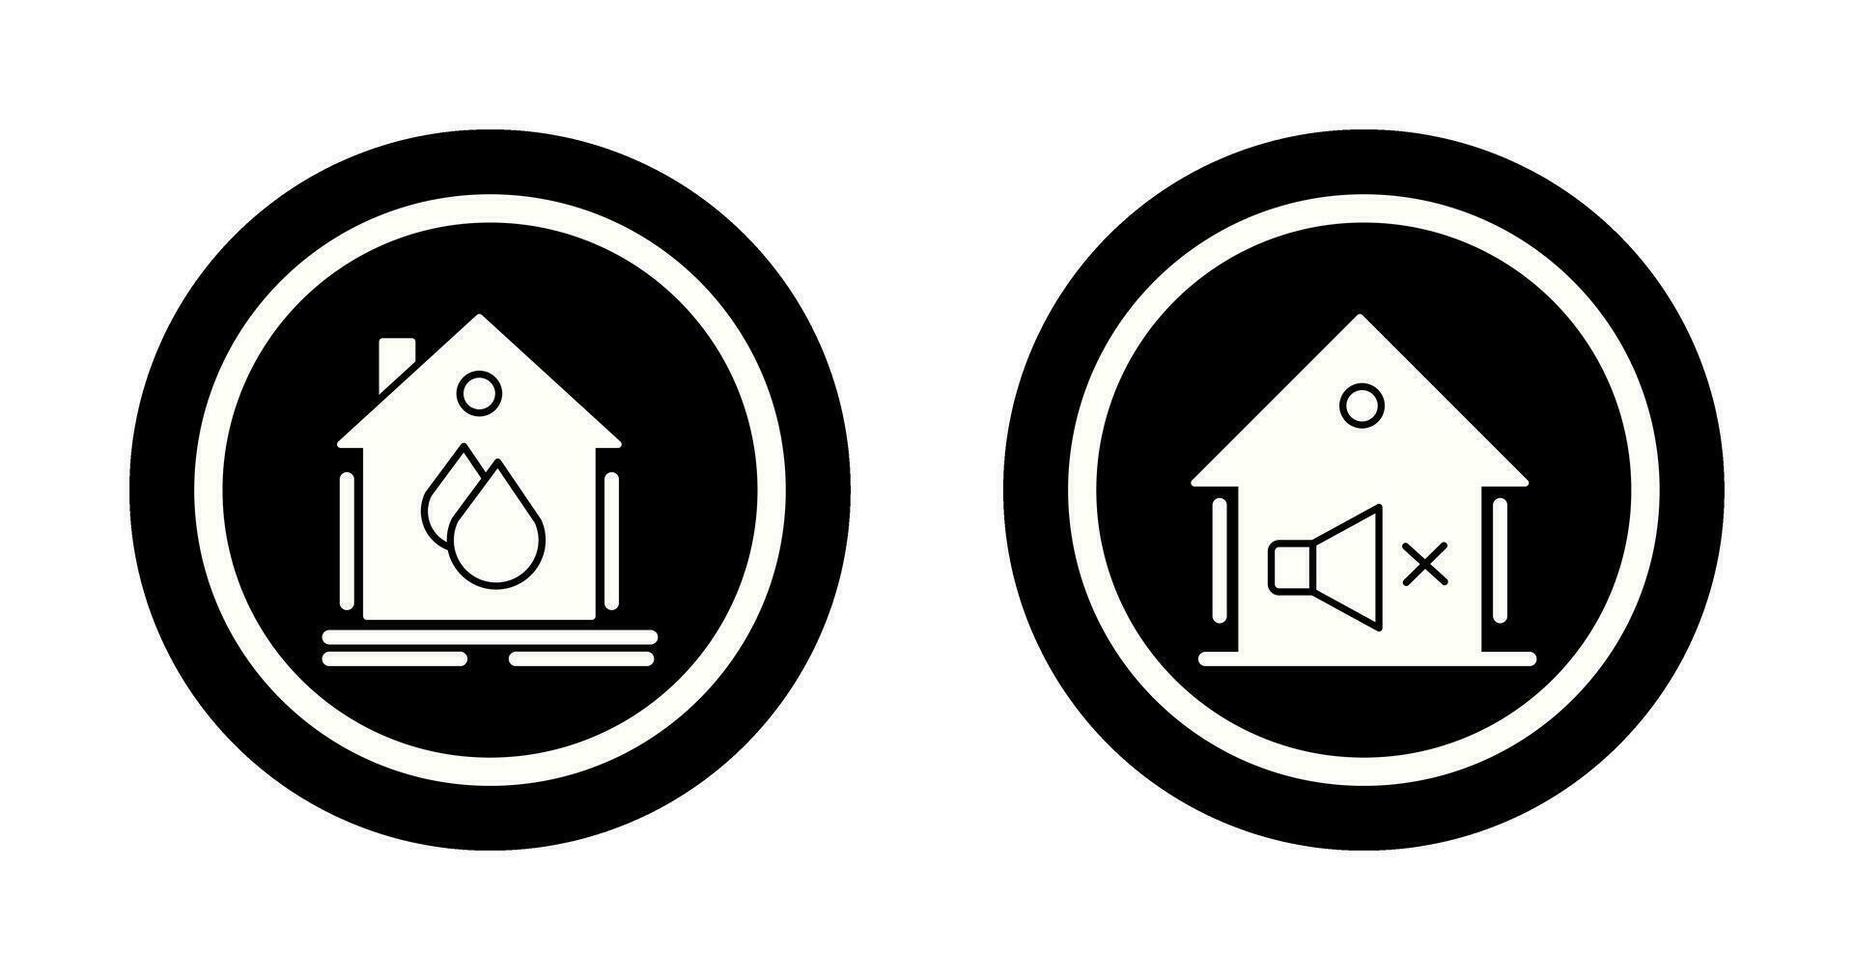 Water Hose and Mute Icon vector